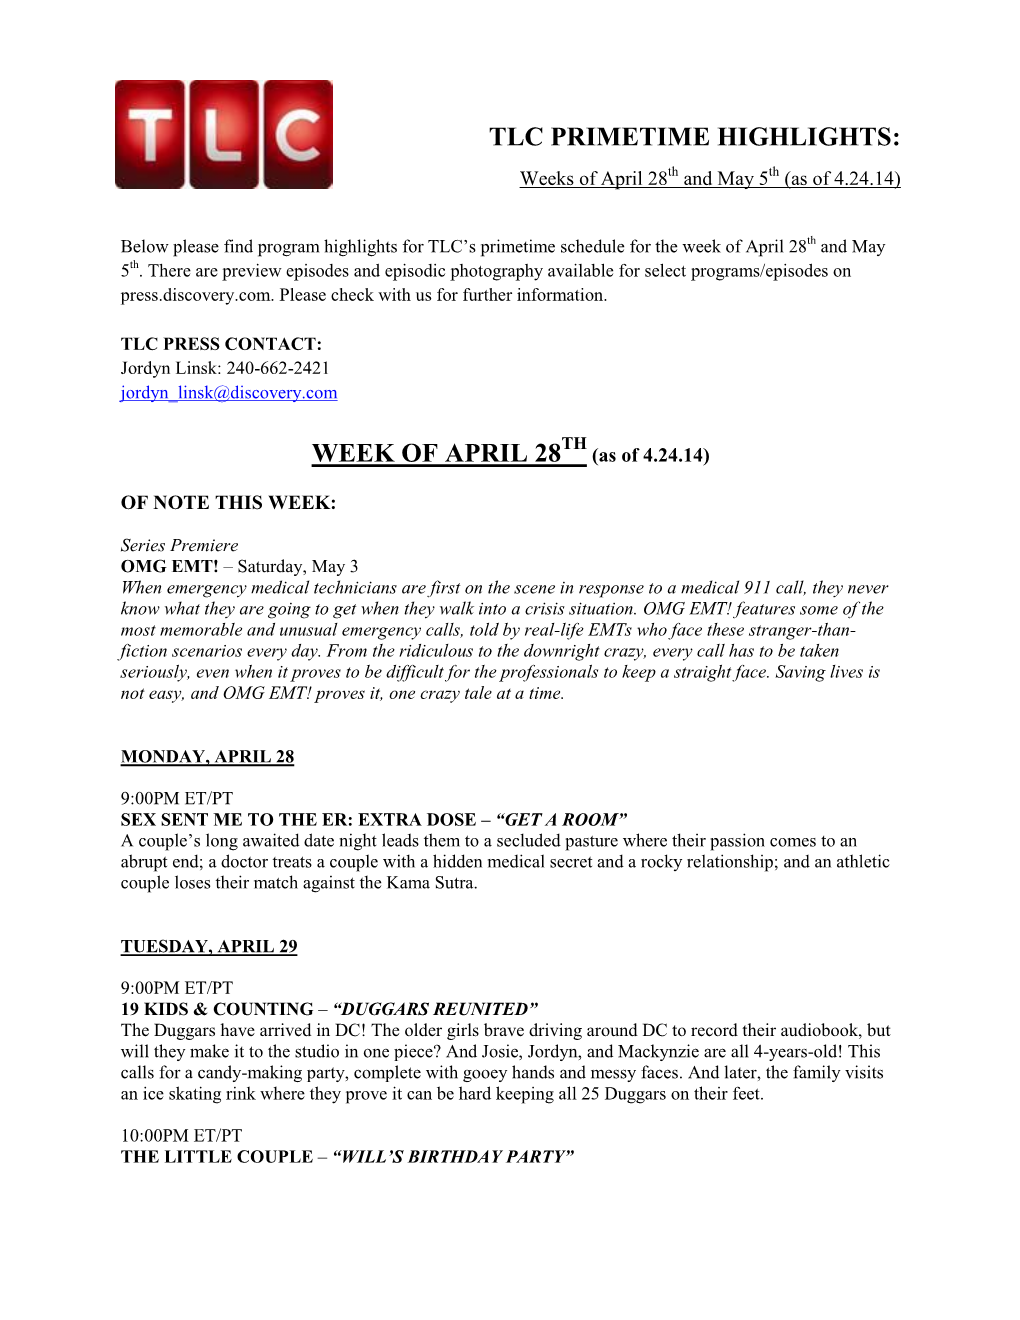 TLC PRIMETIME HIGHLIGHTS: Weeks of April 28Th and May 5Th (As of 4.24.14)